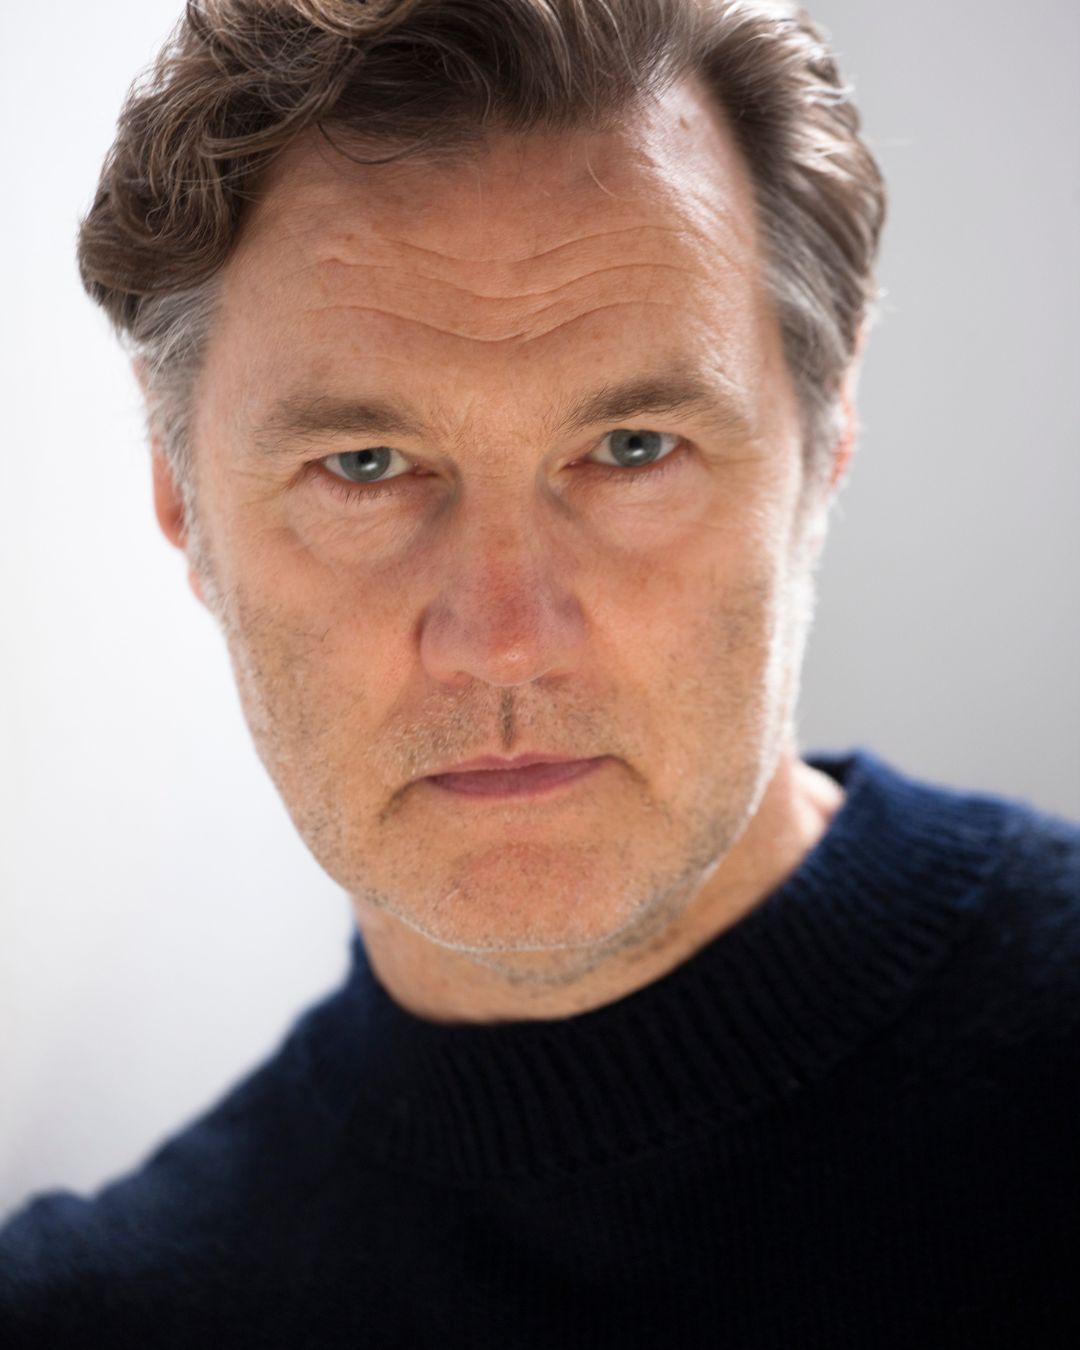 david morrissey ENGLISH ACTOR, DIRECTOR, PRODUCER AND SCREENWRITER and patron of the winnie mabaso foundation